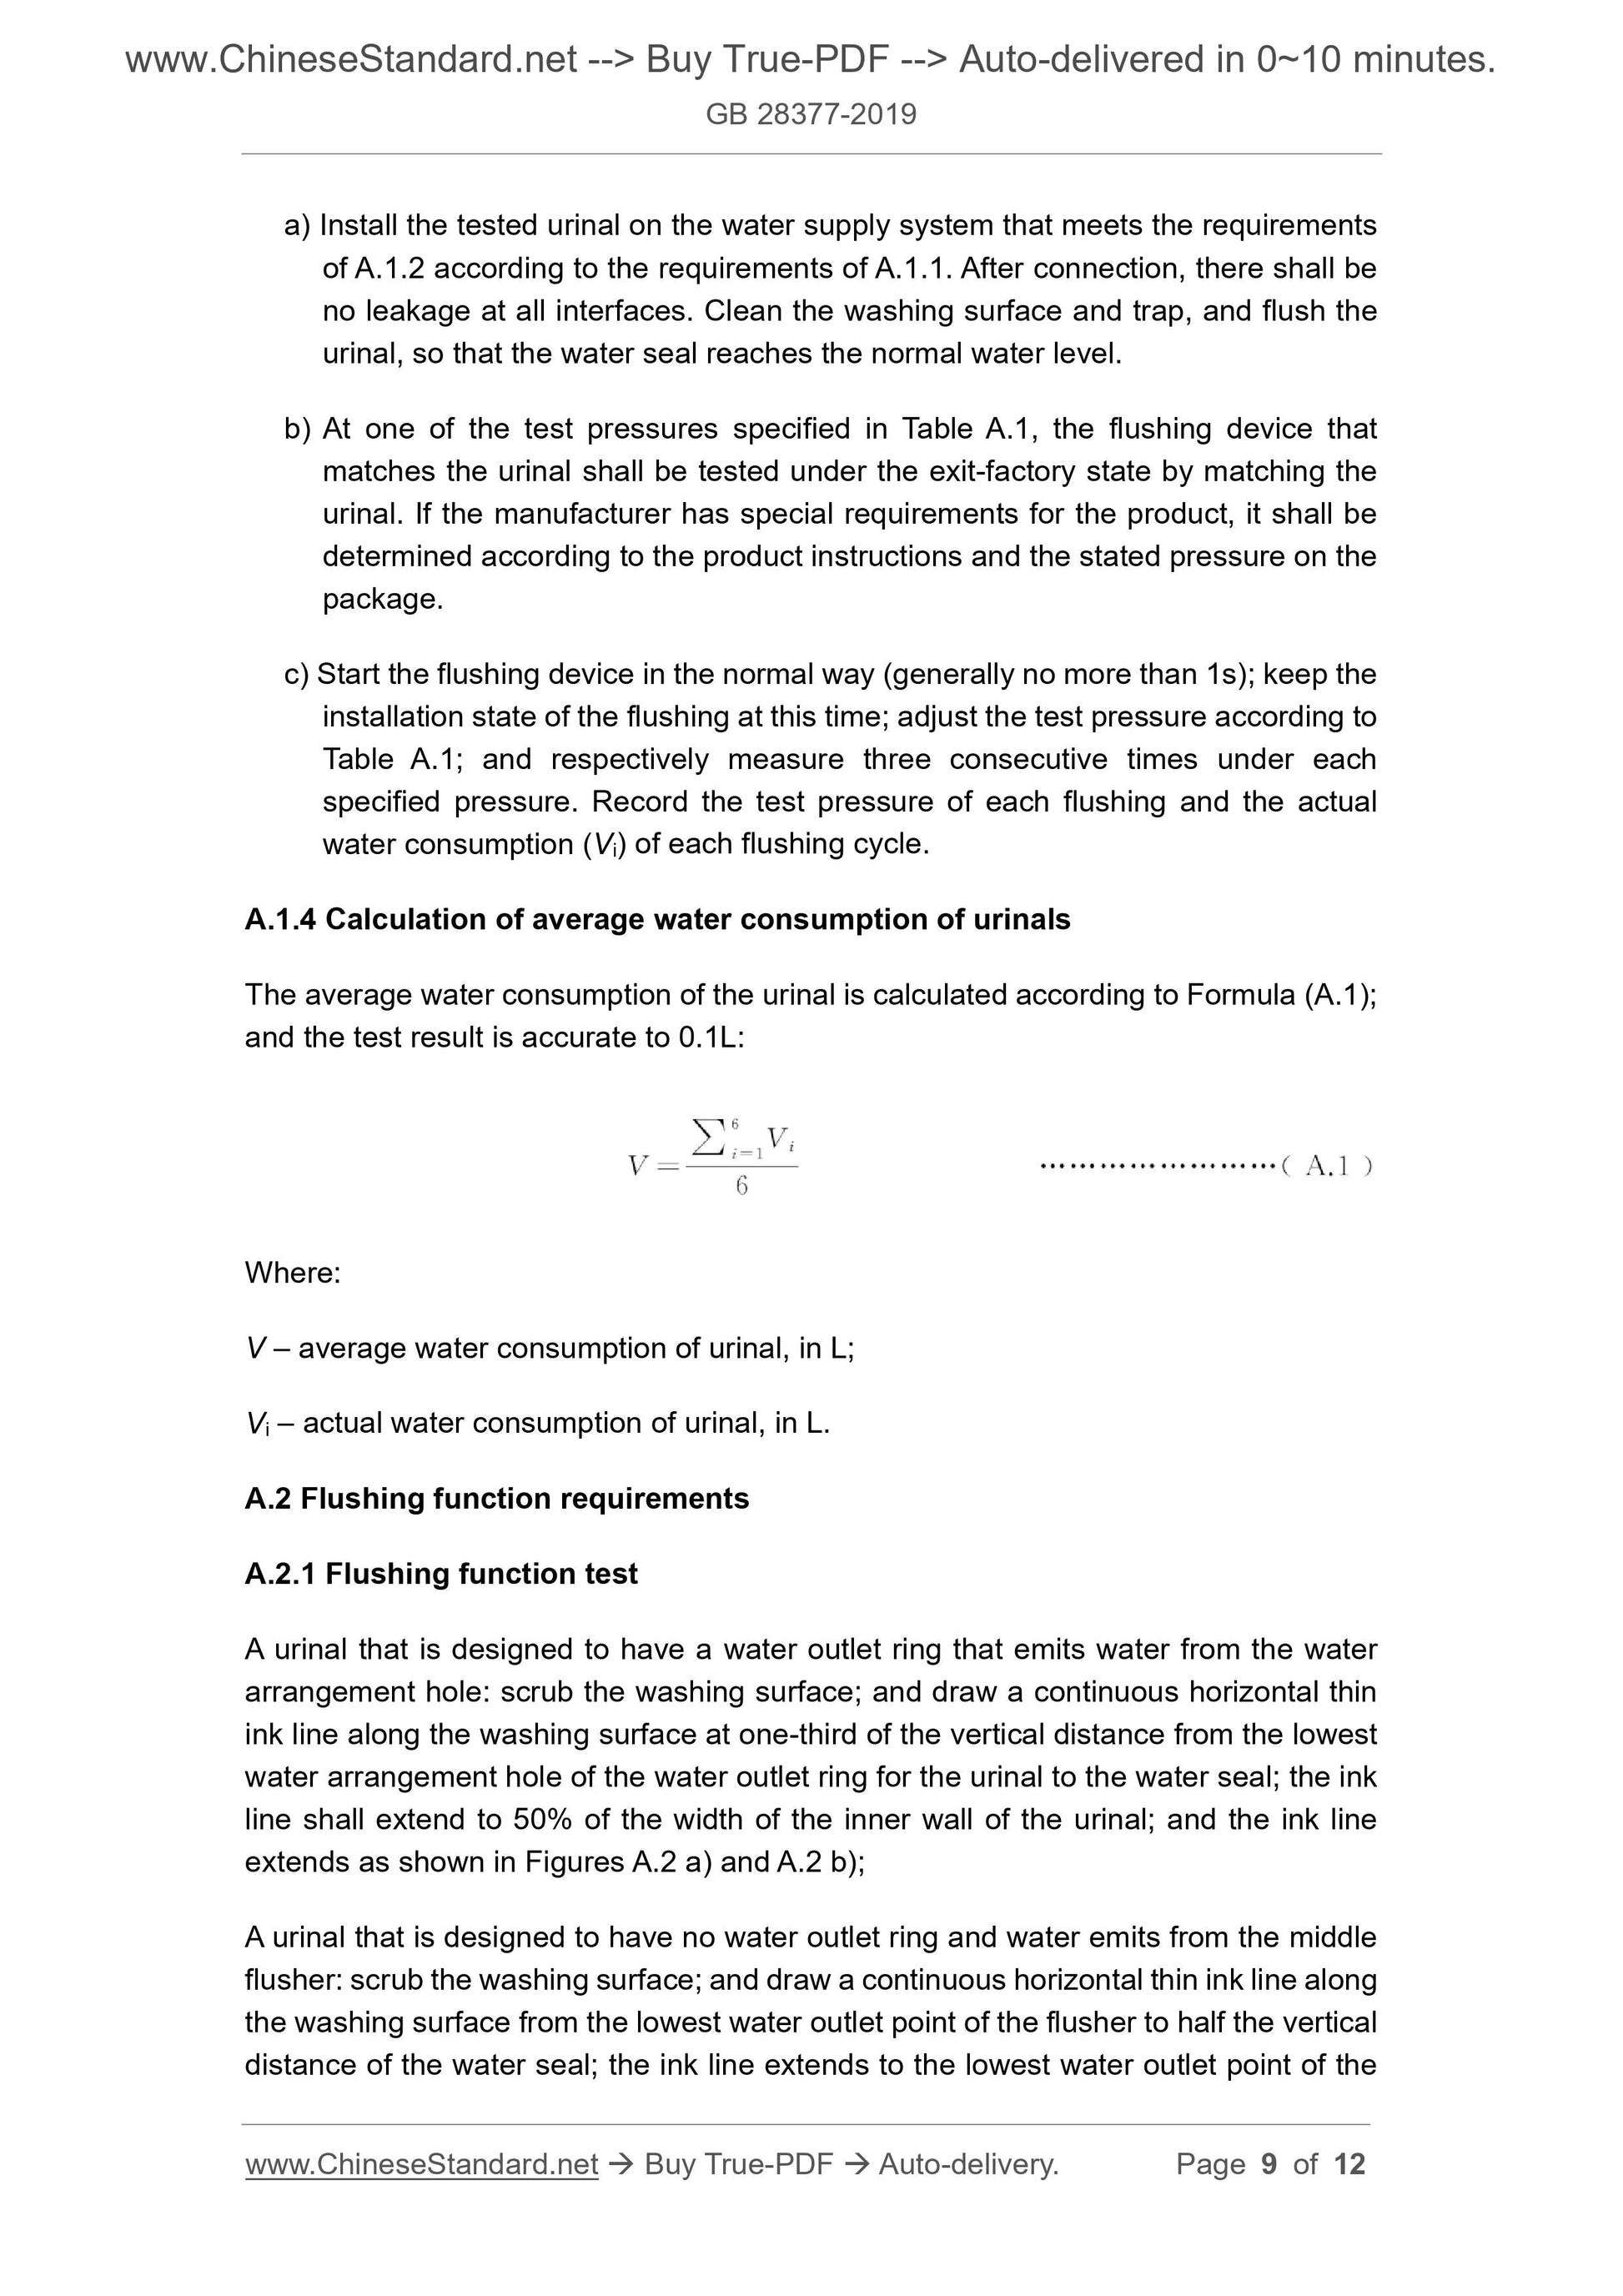 GB 28377-2019 Page 5